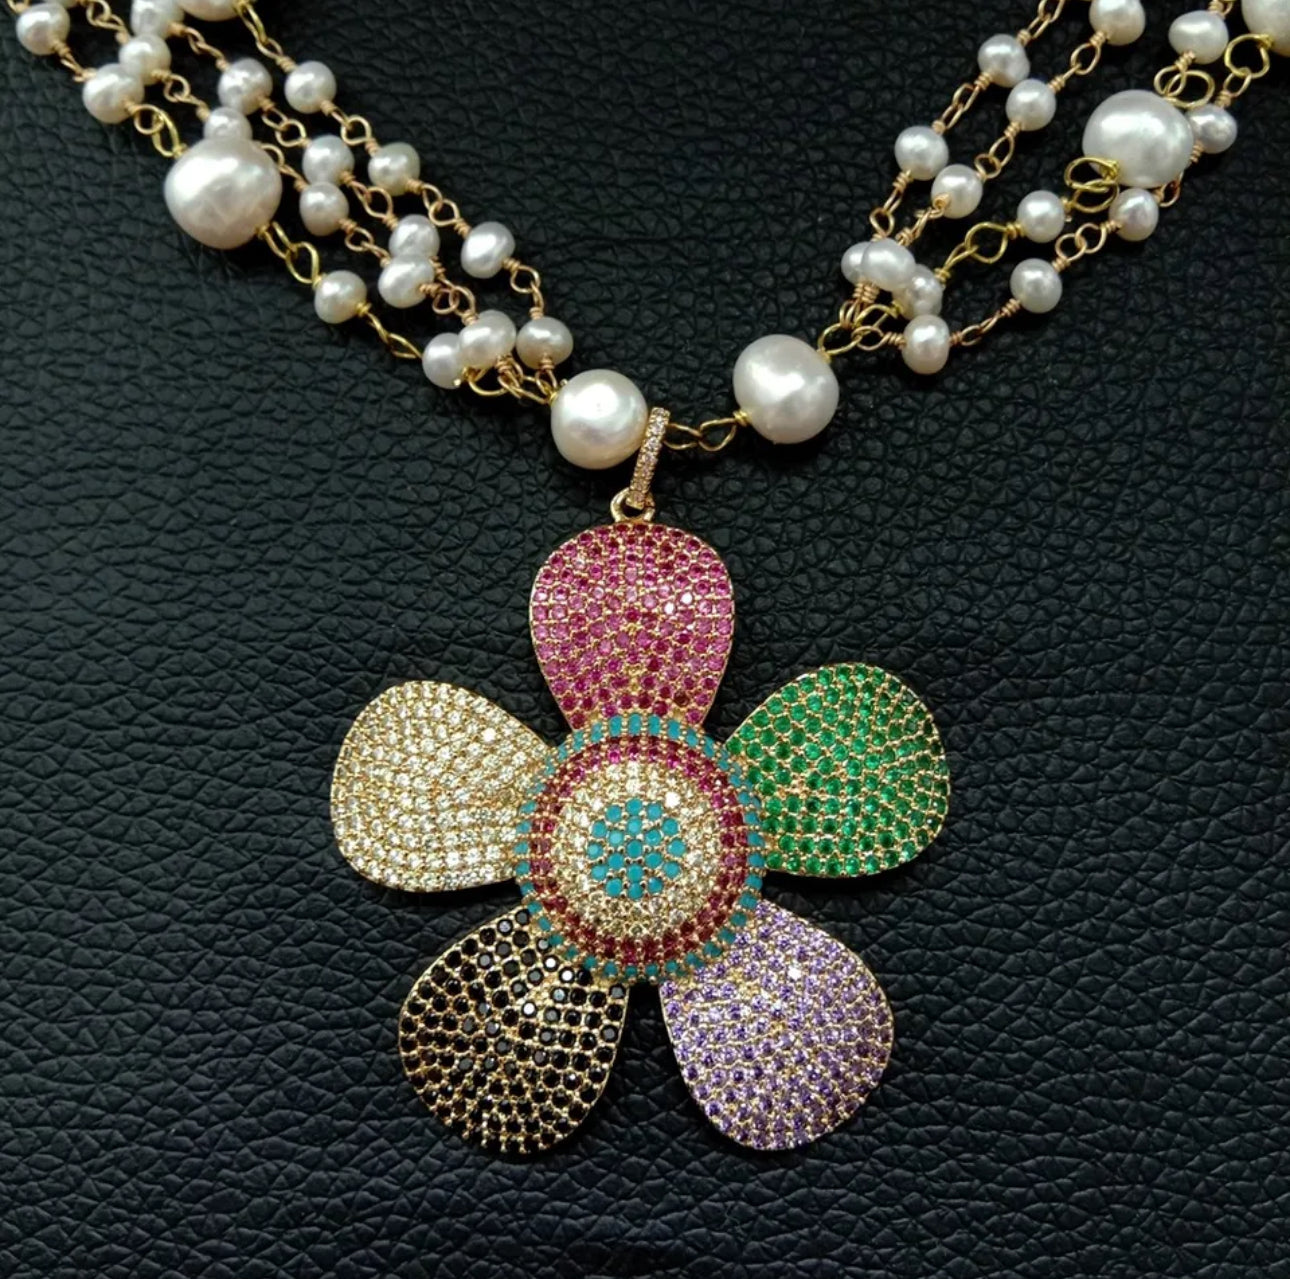 Abbey Flower Pearl Necklace